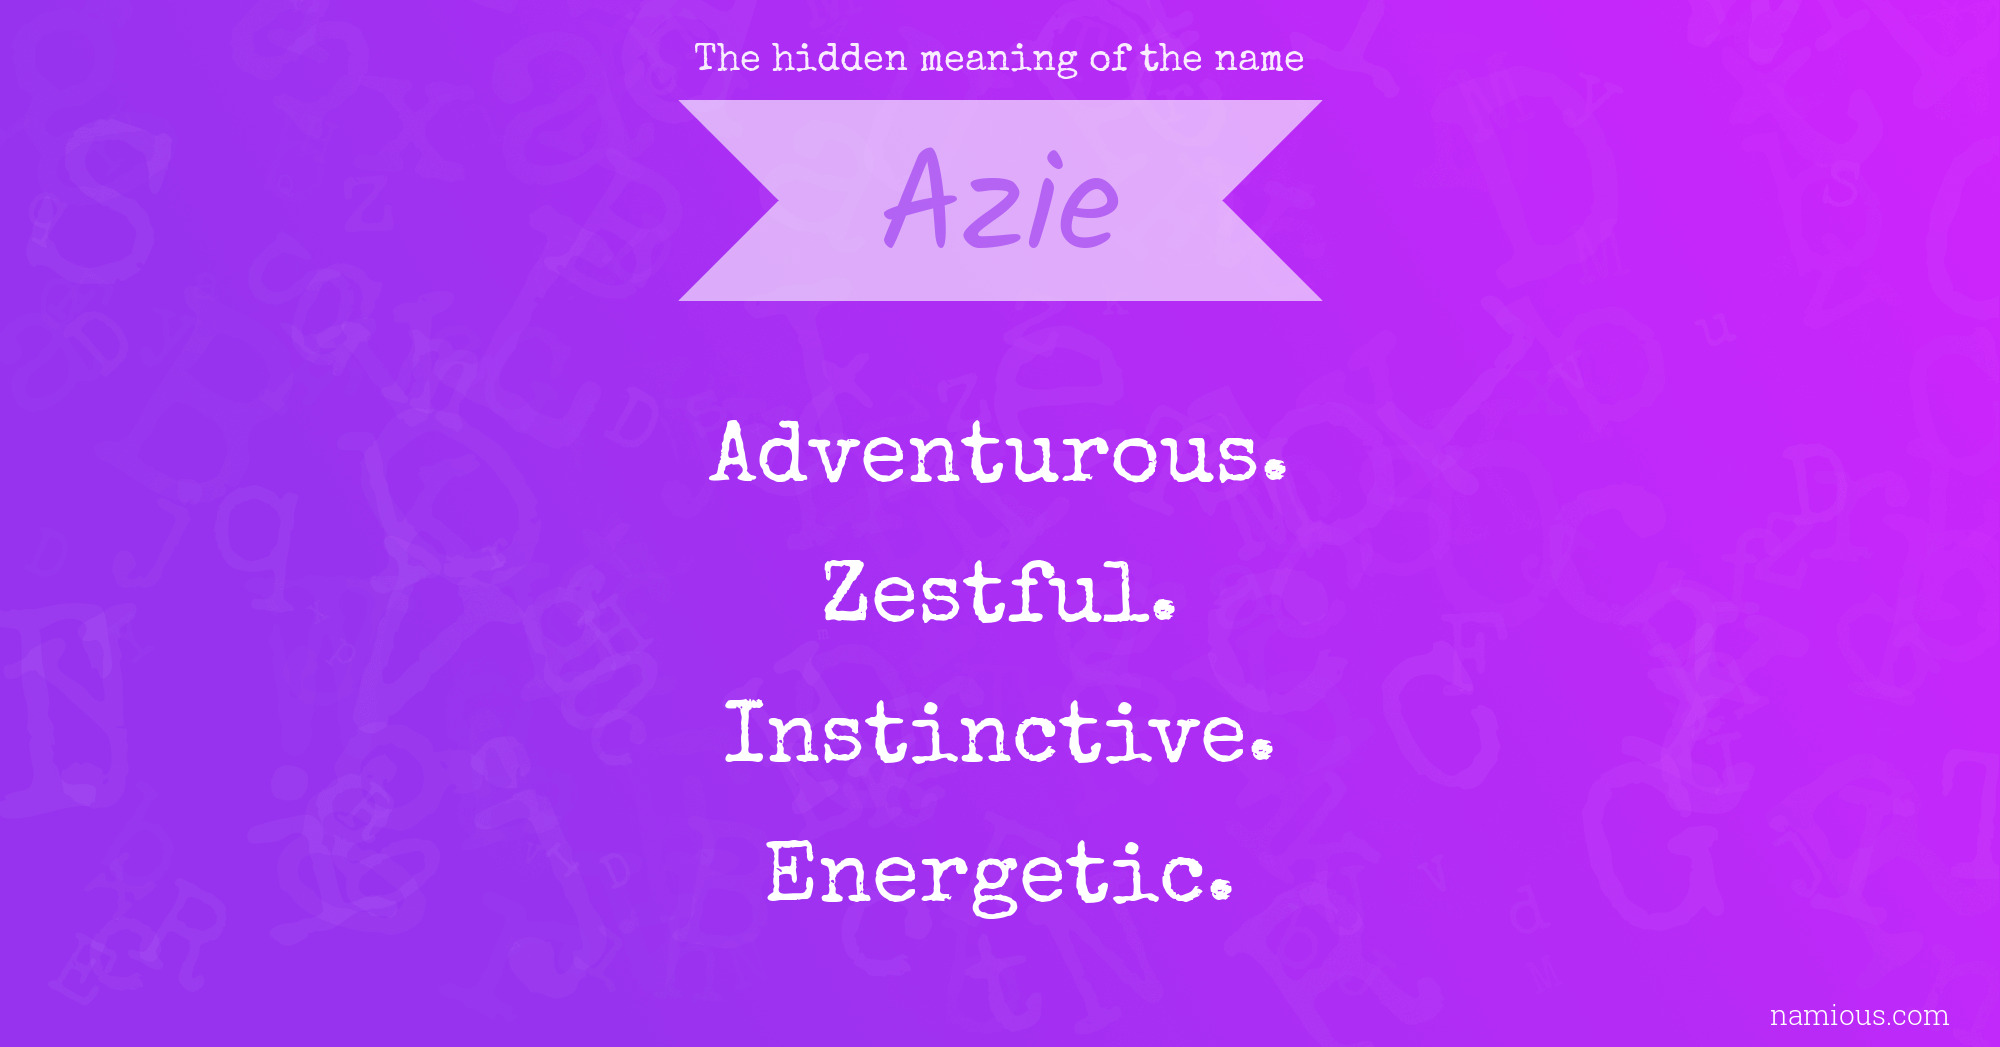 The hidden meaning of the name Azie